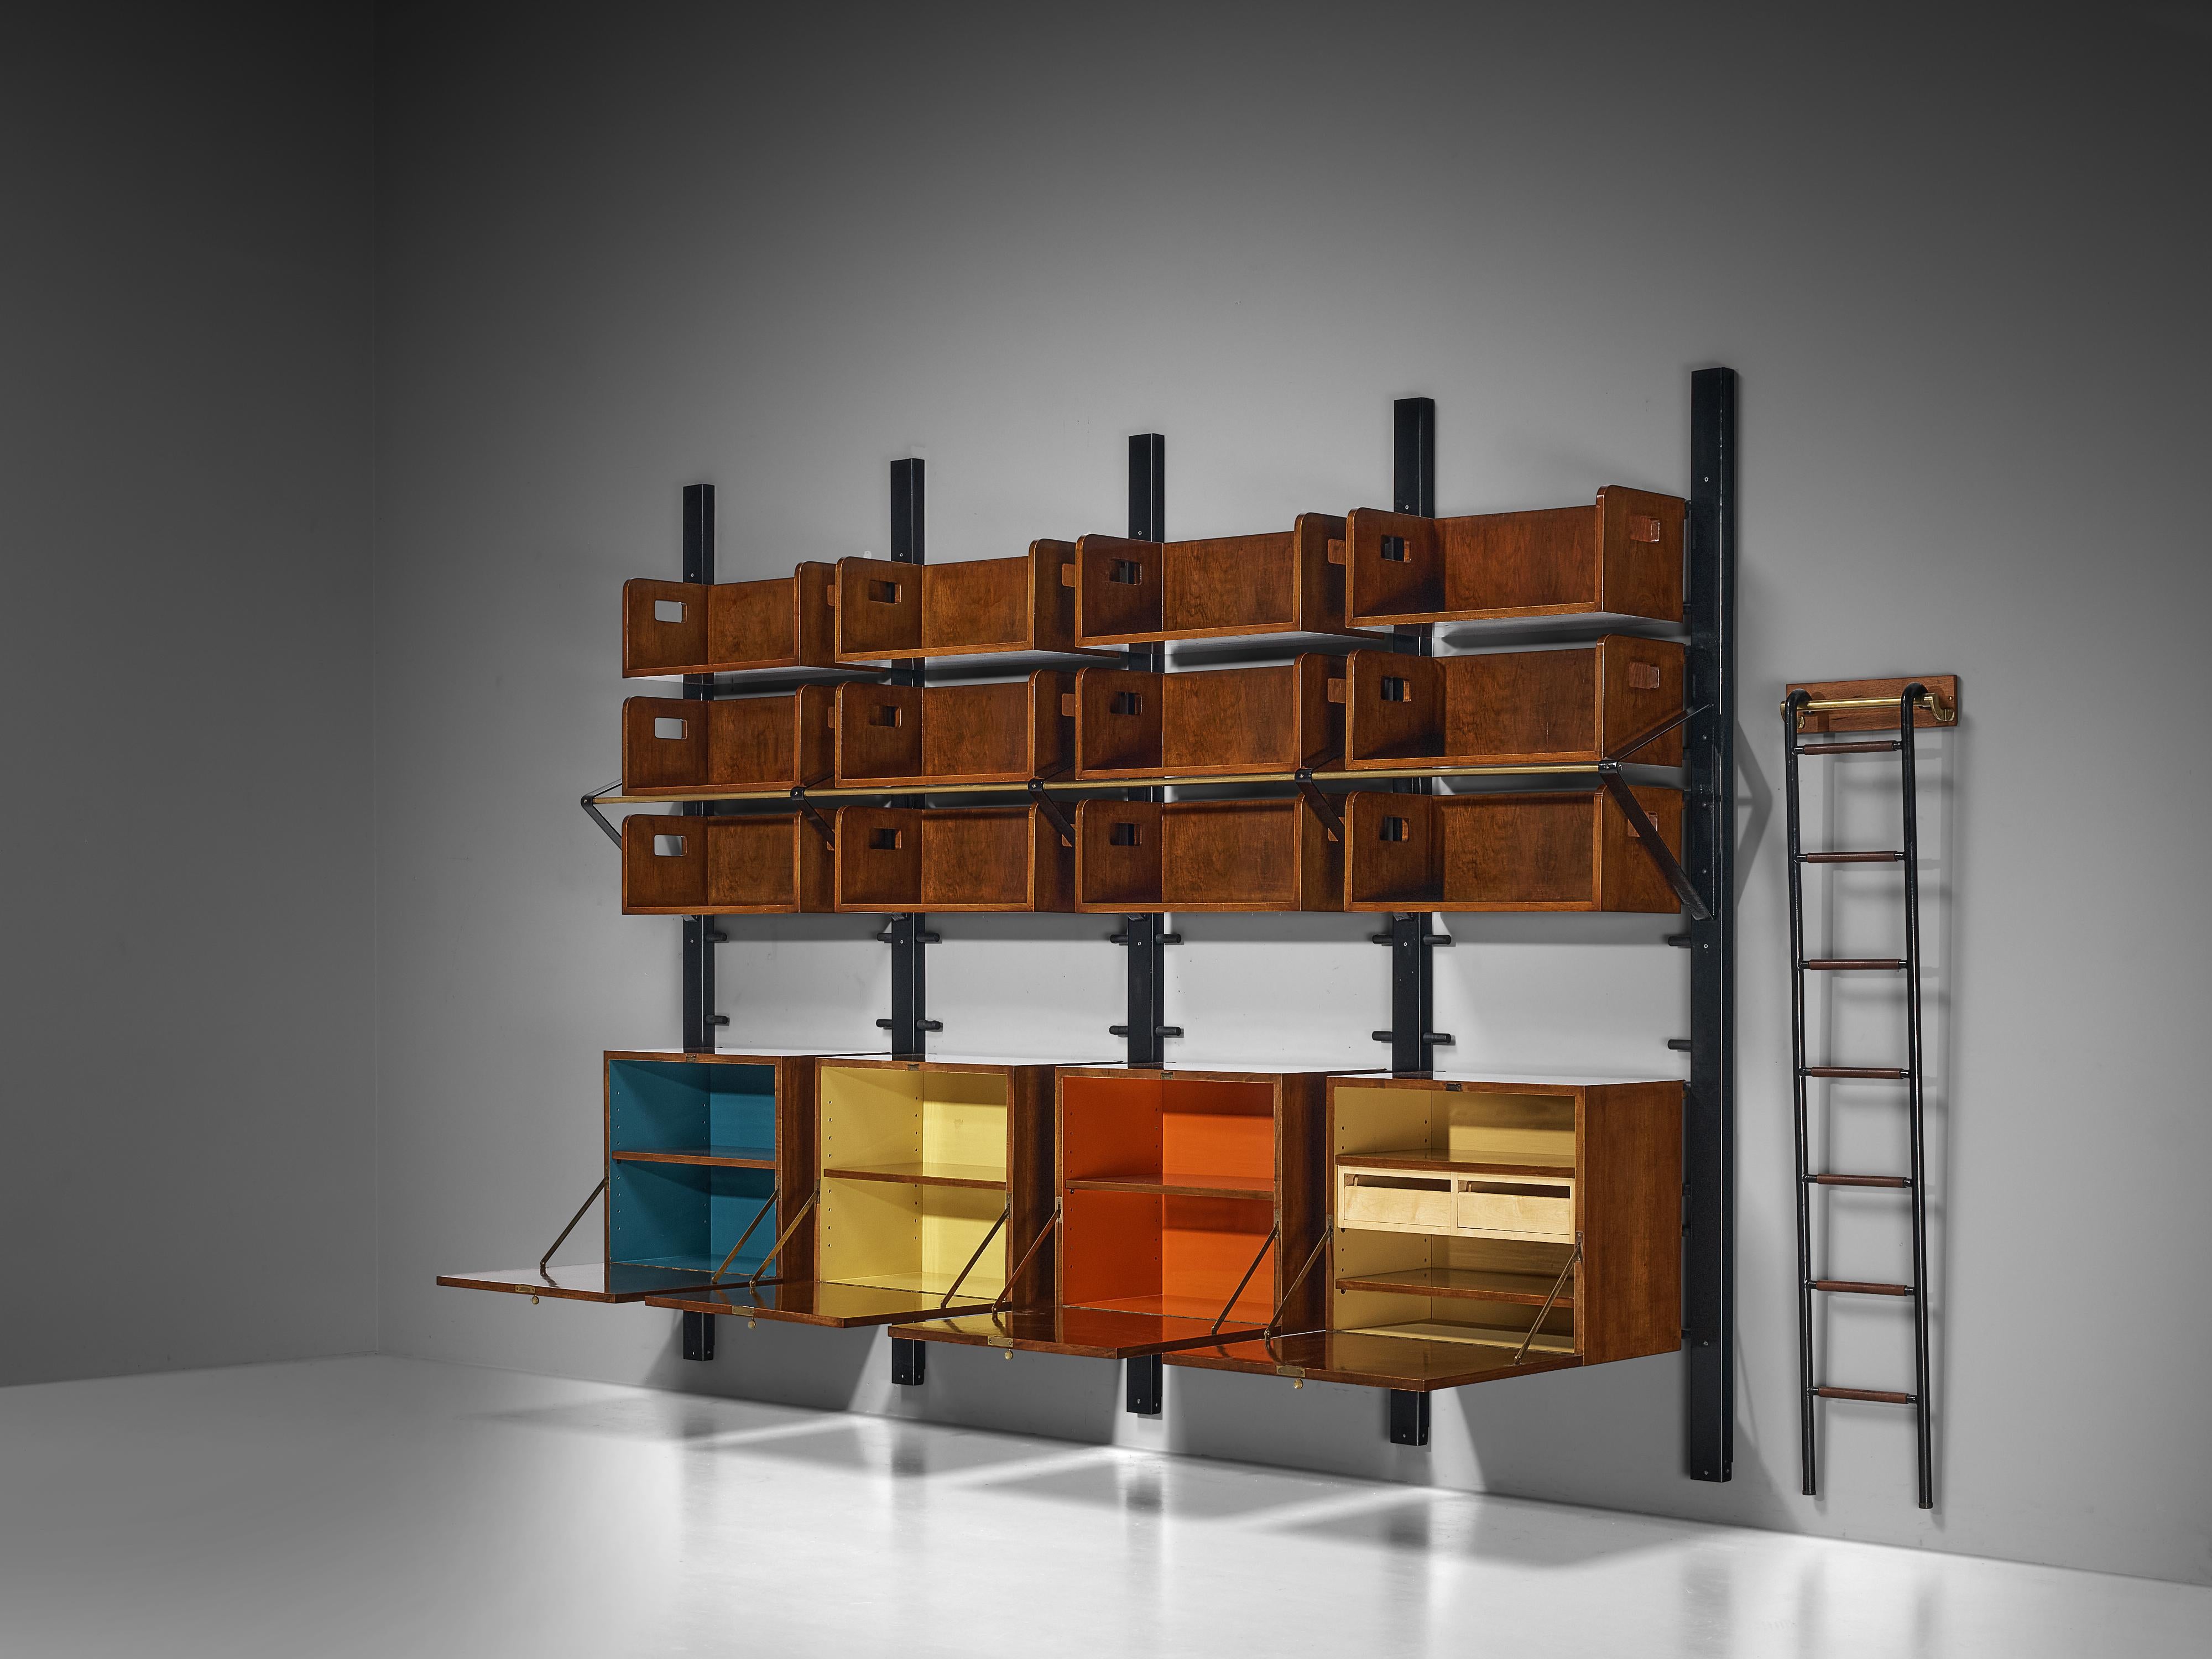 Library wall unit, walnut, lacquered iron, brass, leather, Italy, 1950s

Stunning custom made wall unit made in Italy in the 1950s. The bookcase highlights the makers architectural sensibility and refined taste for elegant proportions. The